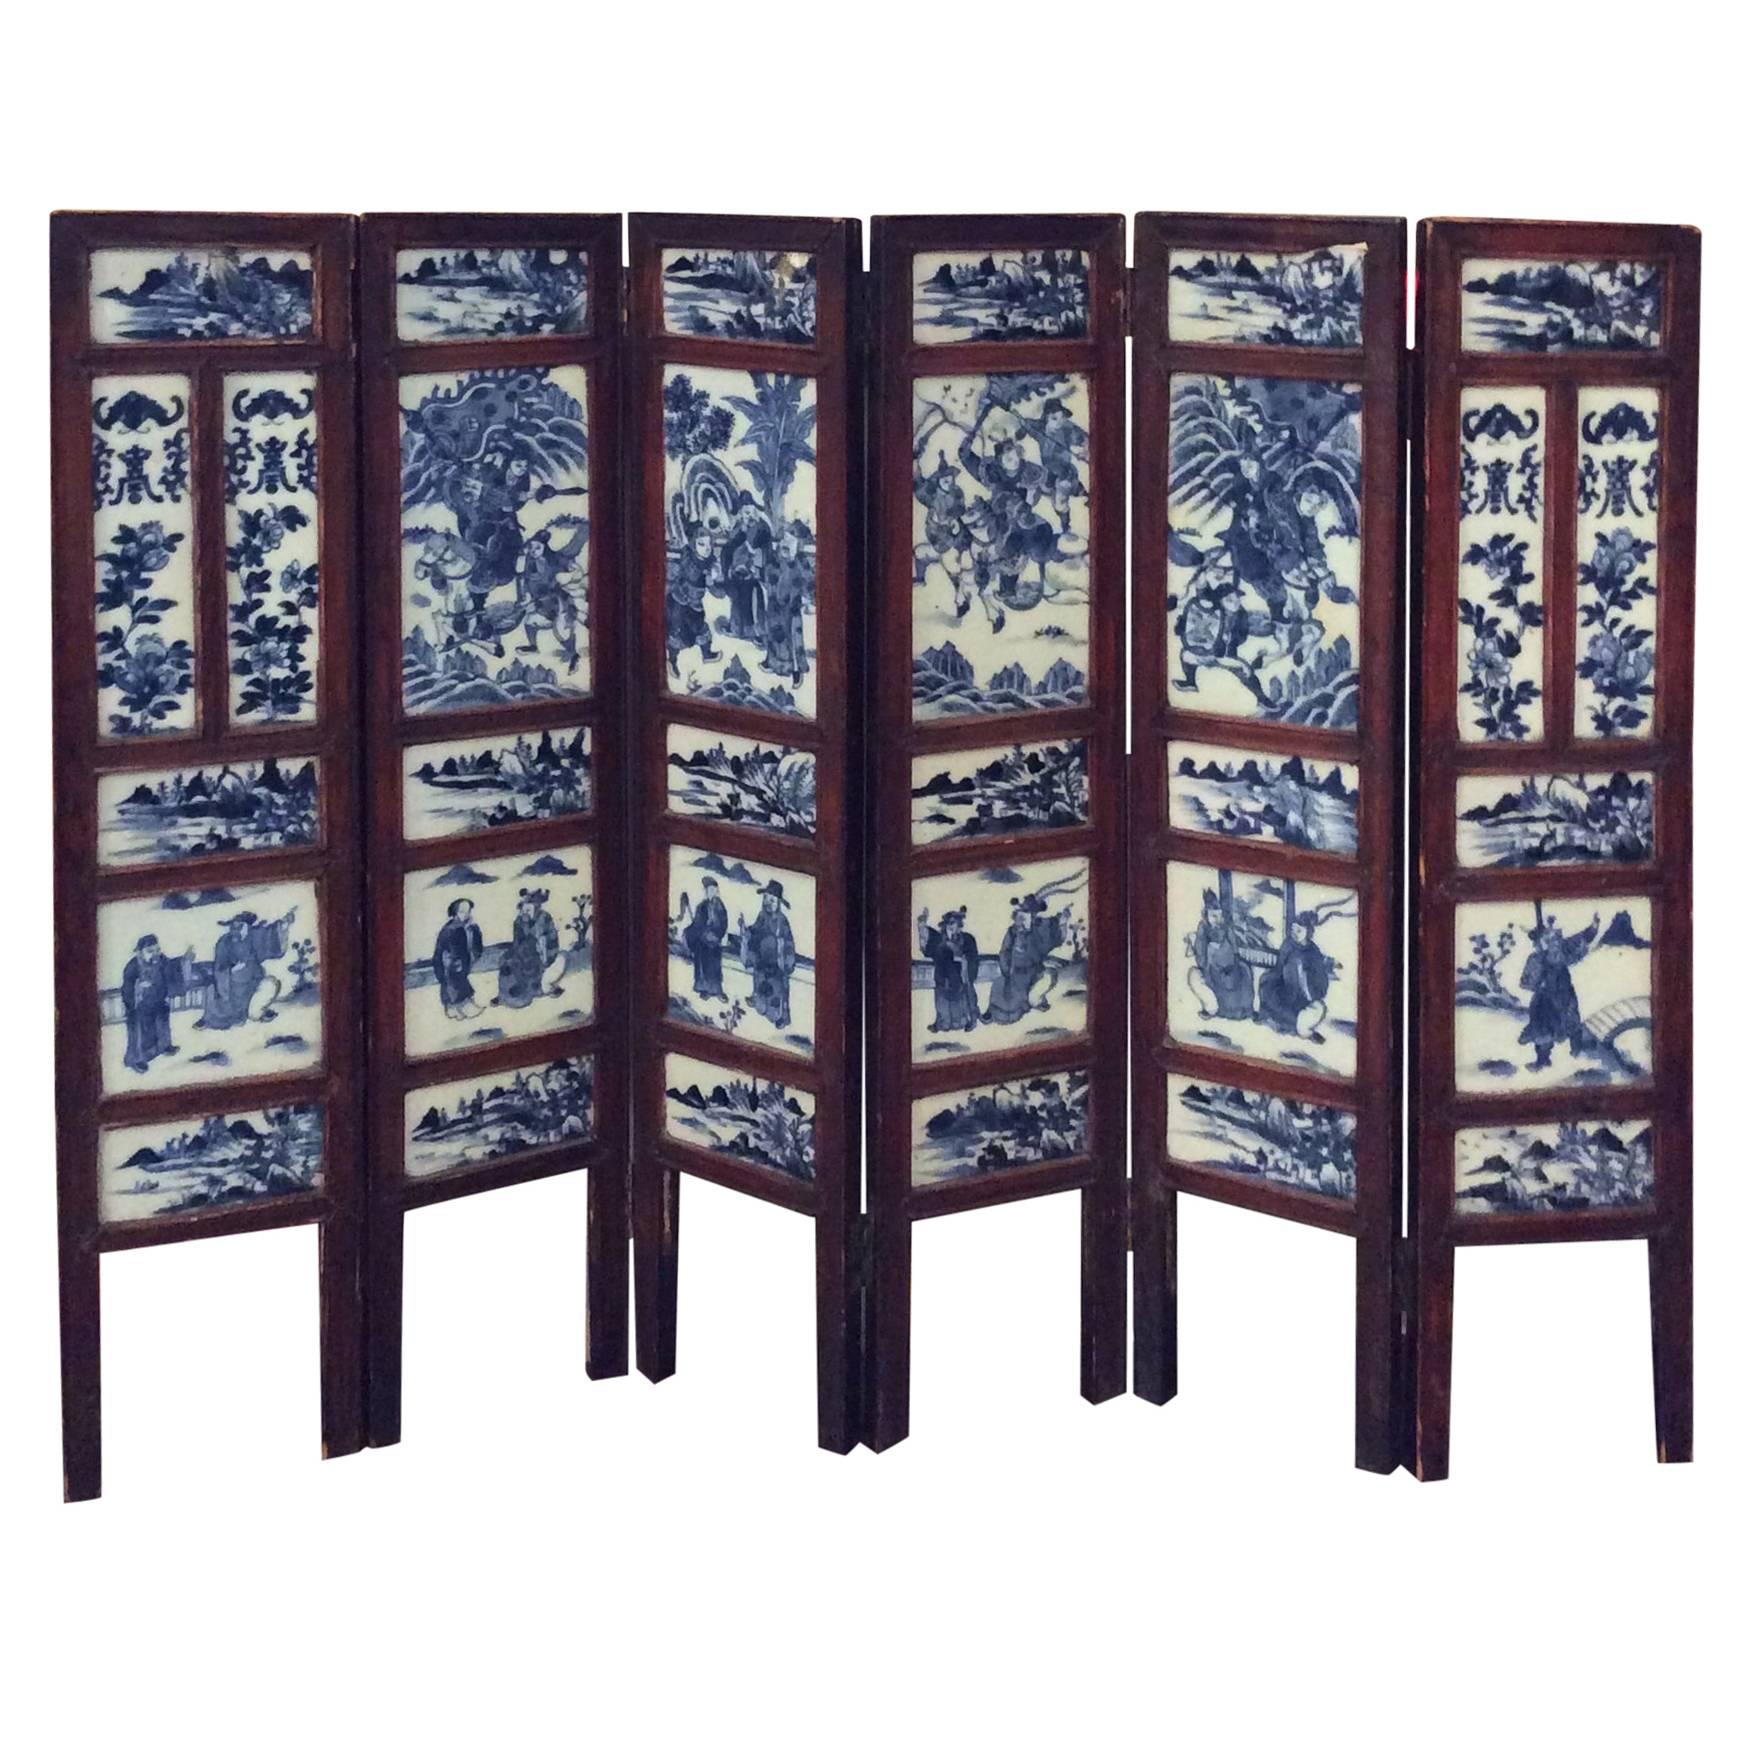 Qing Dynasty Blue and White Chinese Table Screen